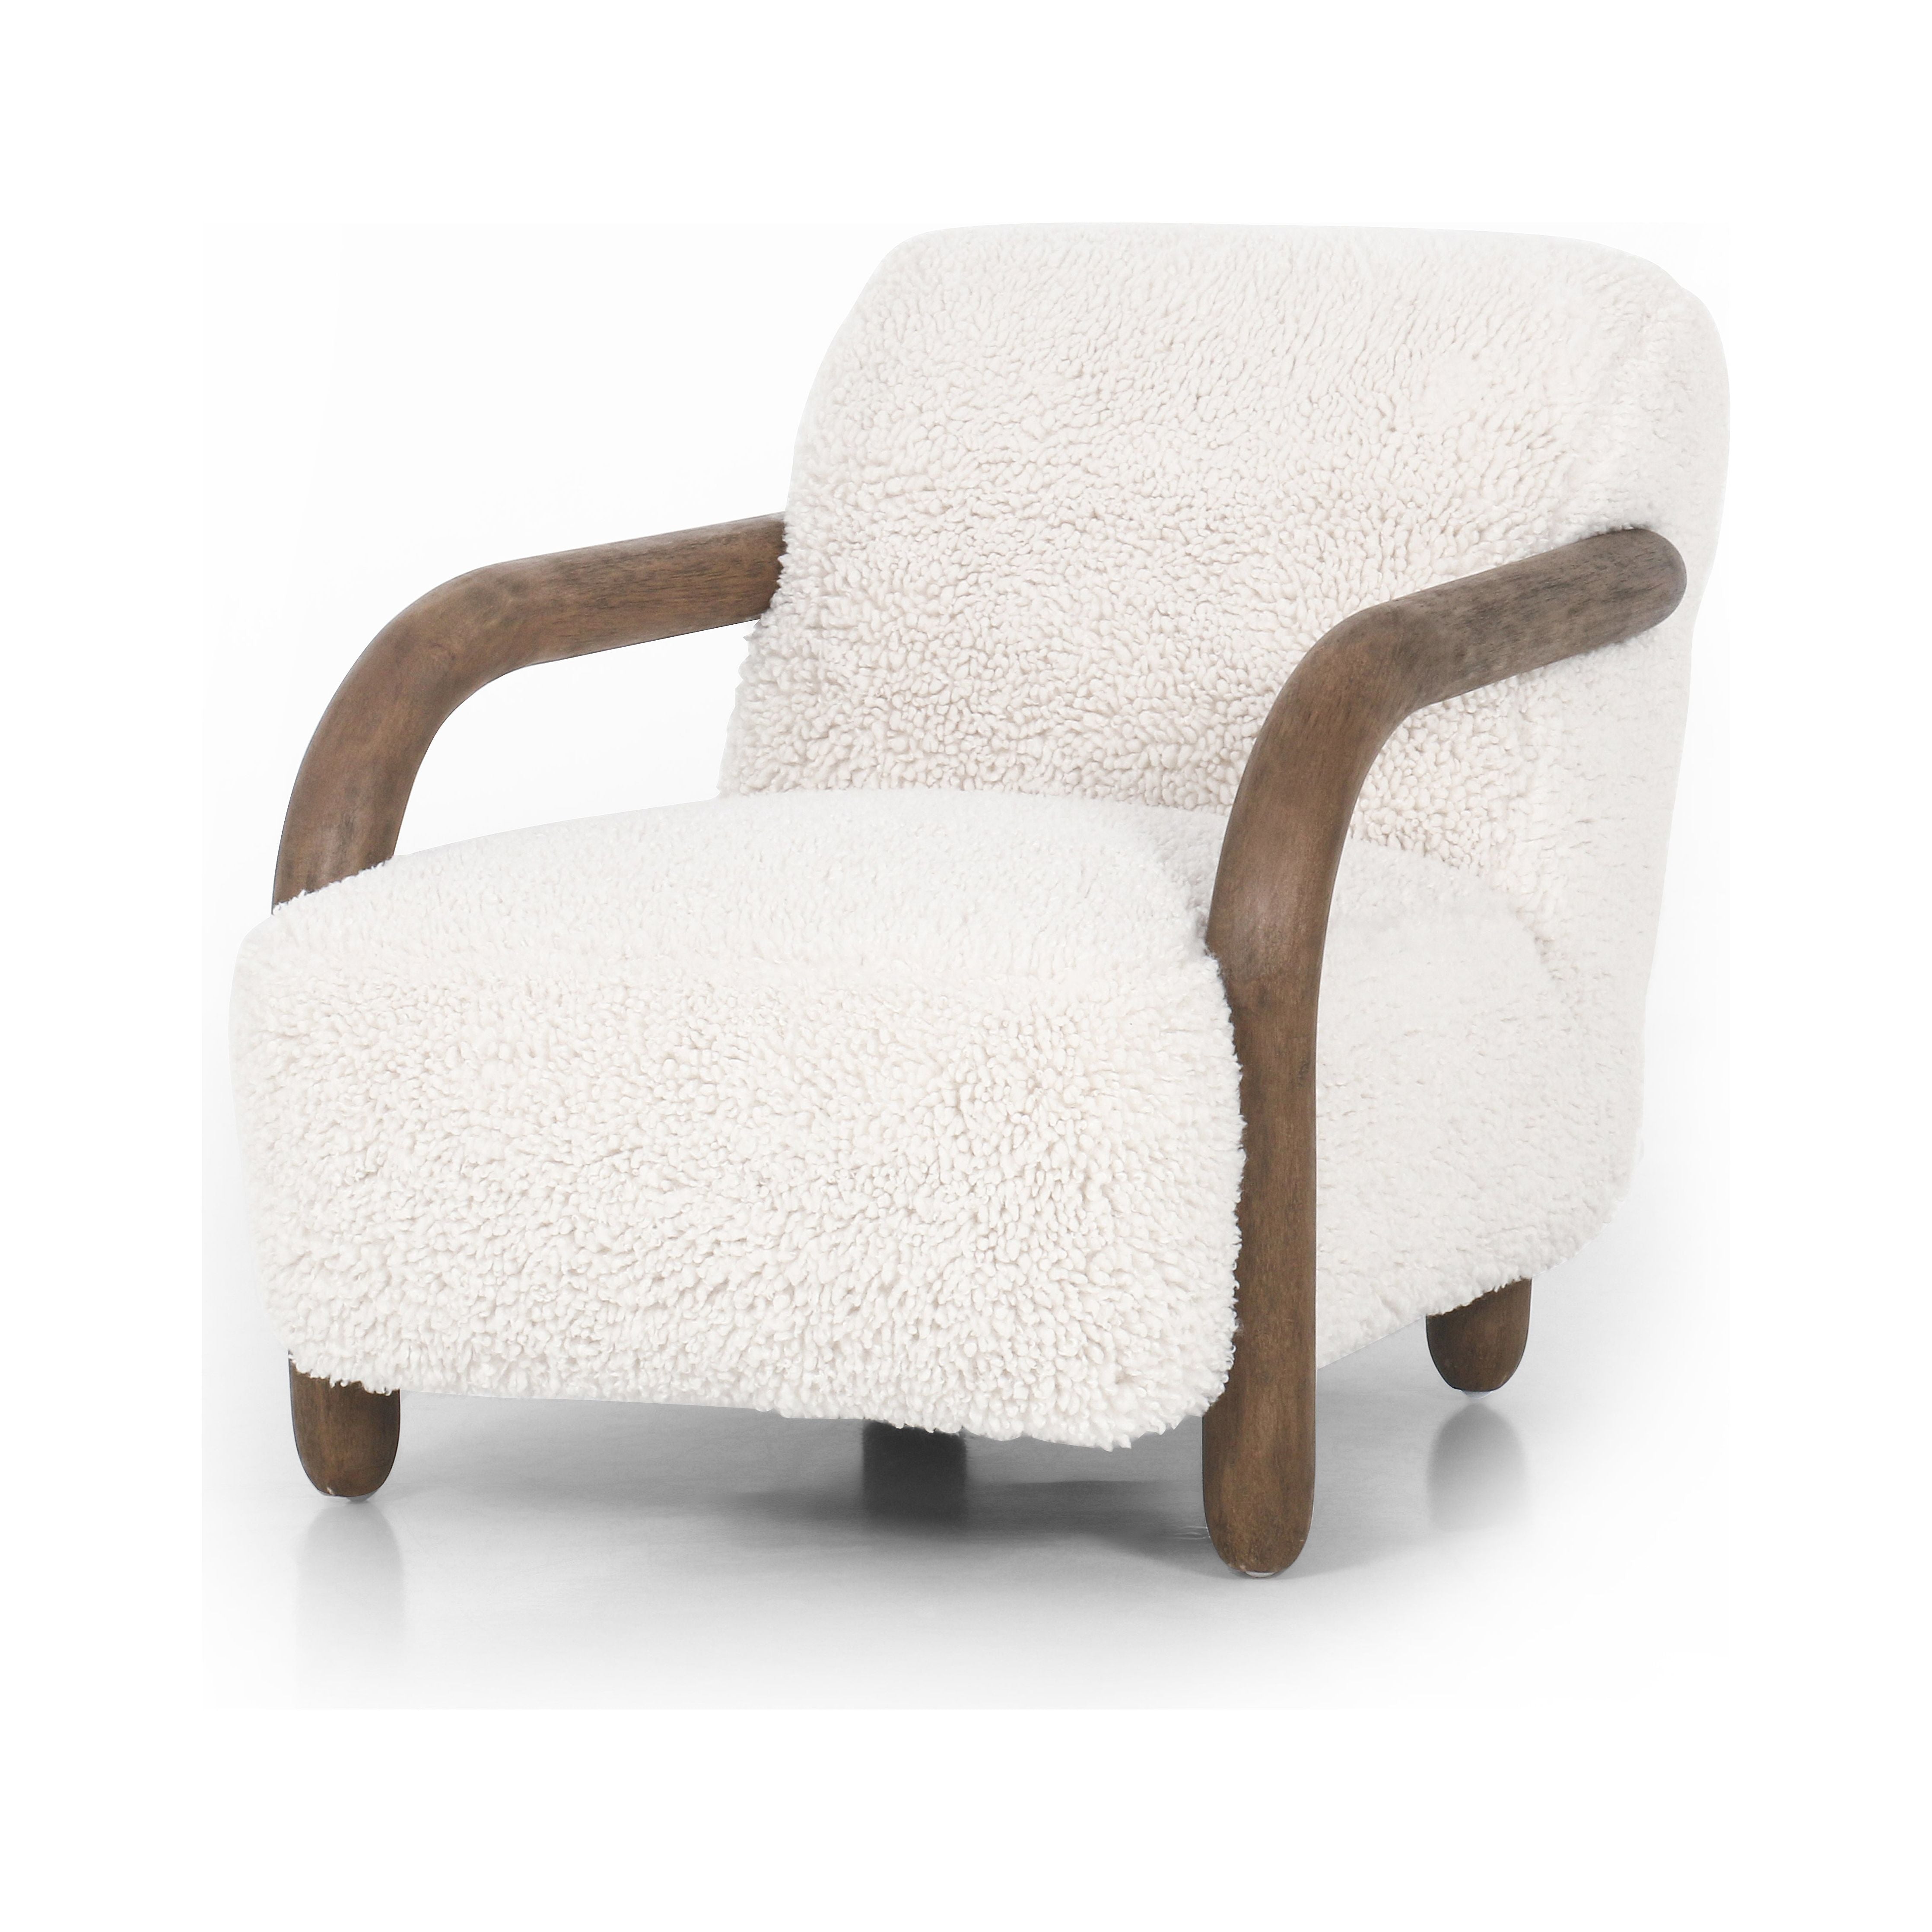 This versatile accent chair is upholstered in a faux Mongolian shearling with a textural high pile. A contrasting, chunky parawood frame hugs the seat and is wire-brushed for a warm, vintage feel. Amethyst Home provides interior design, new construction, custom furniture, and area rugs in the Newport Beach metro area.